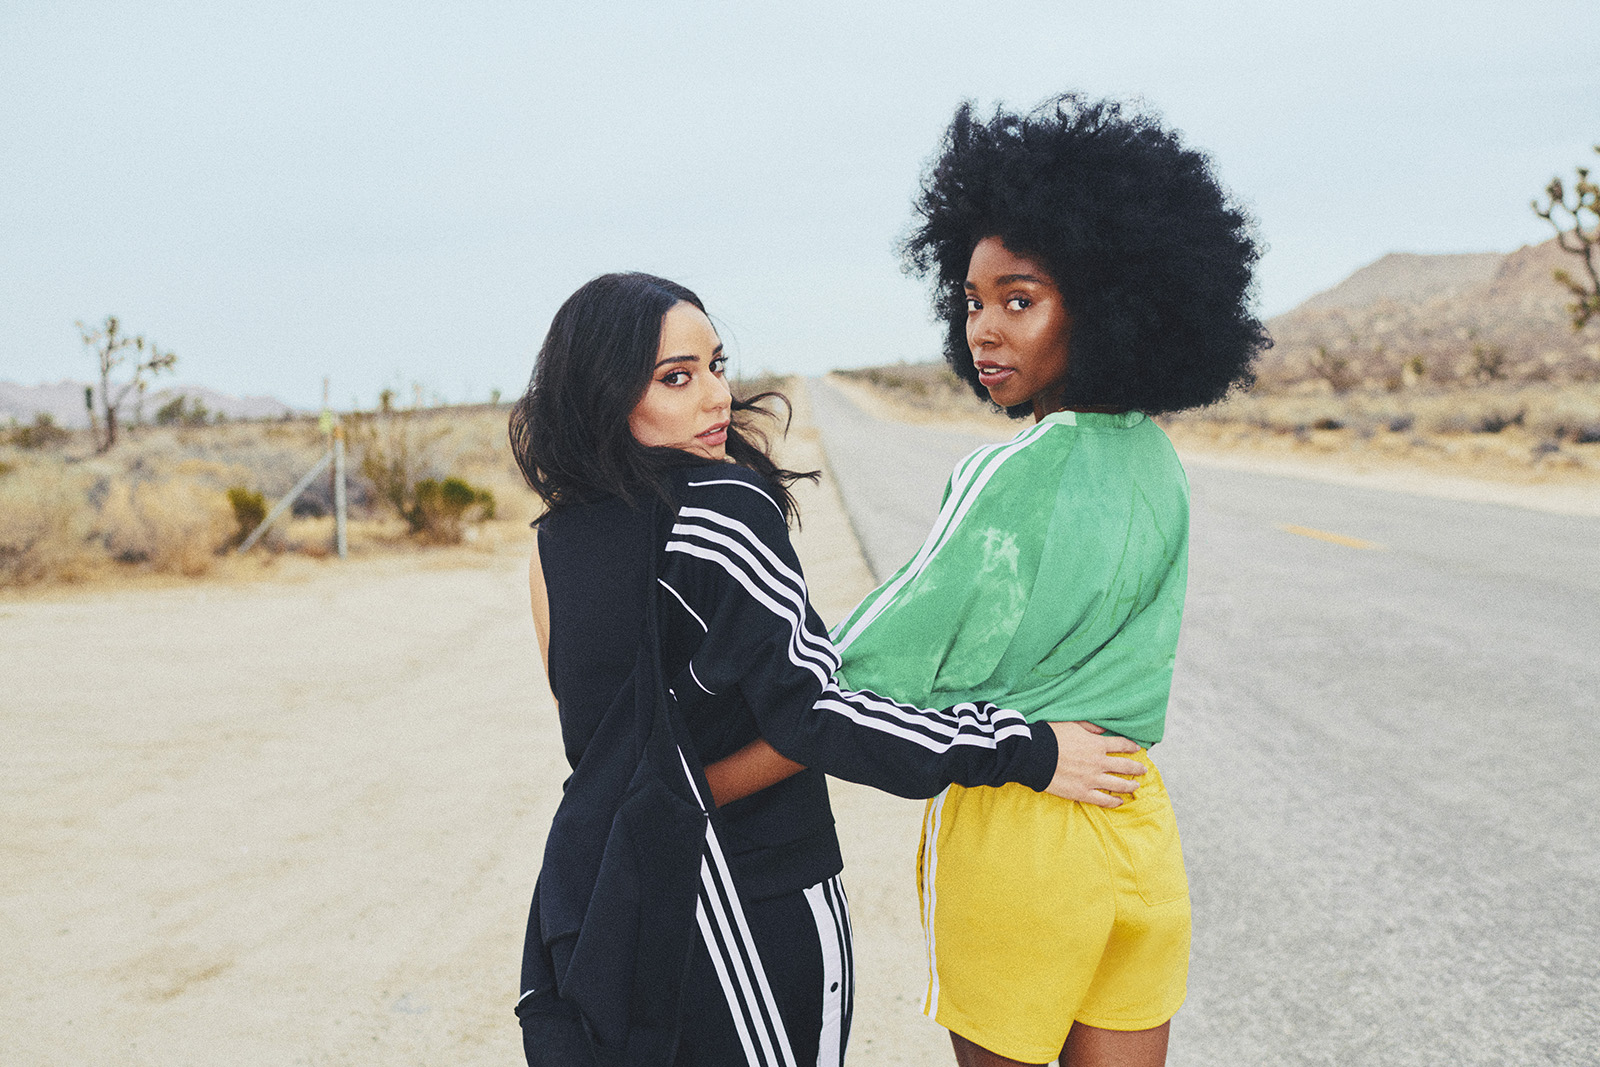 Two women, one in all black with her track jacket hanging off one shoulder and the other in bright green and yellow adidas gear stand on the side of a desert road with arms around each other’s waists, looking over their shoulders.